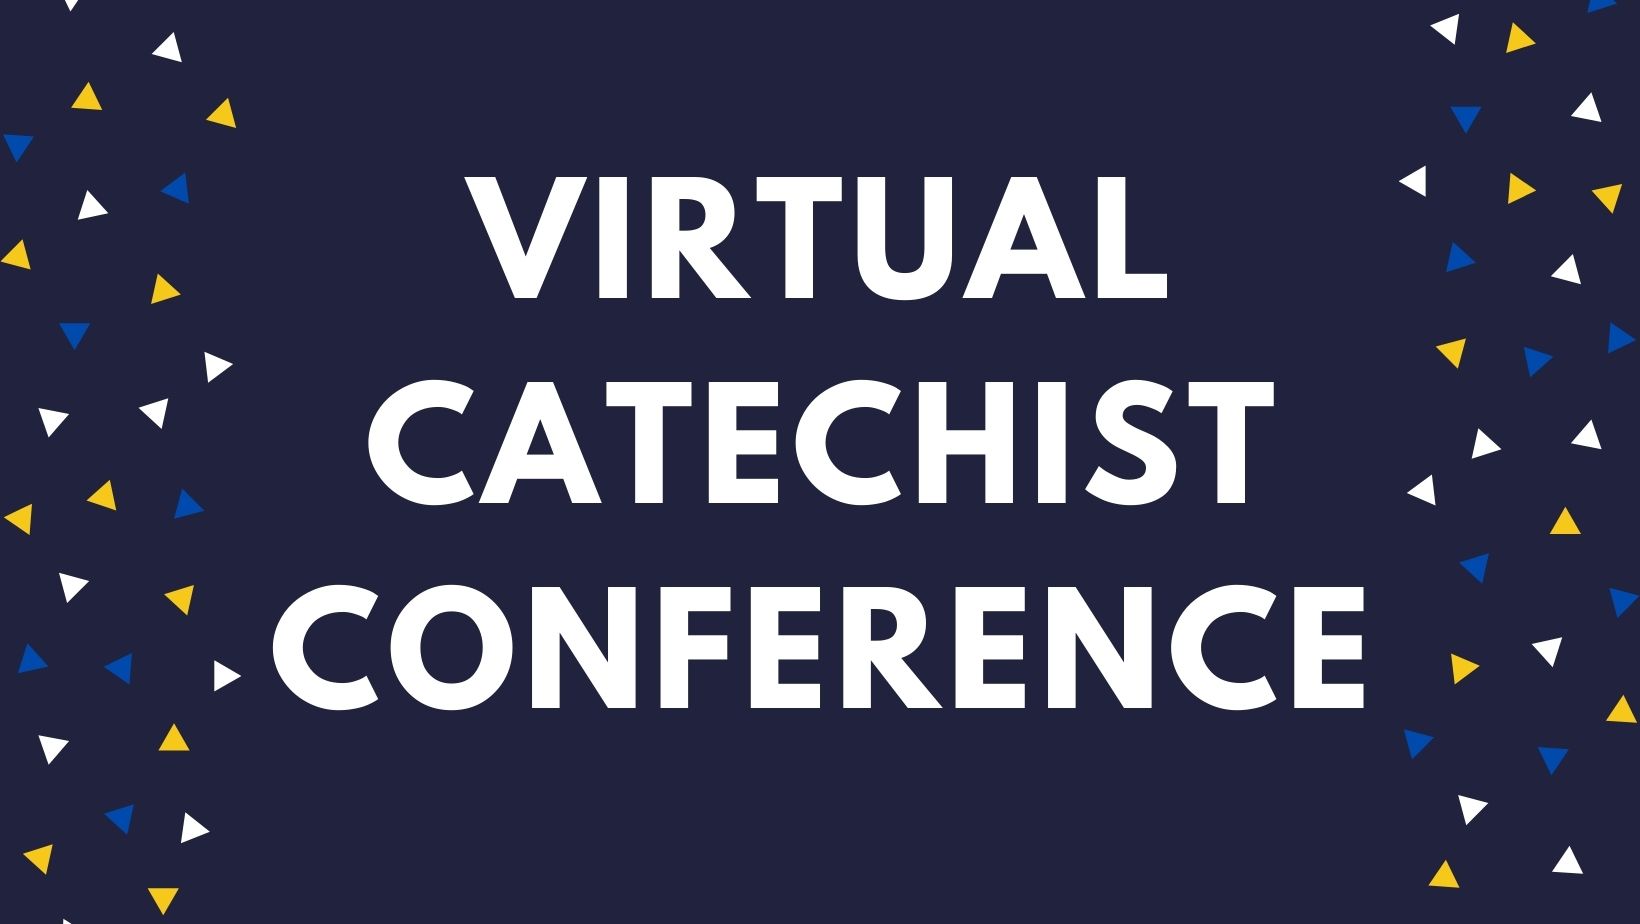 VIRTUAL CATECHIST CONFERENCE